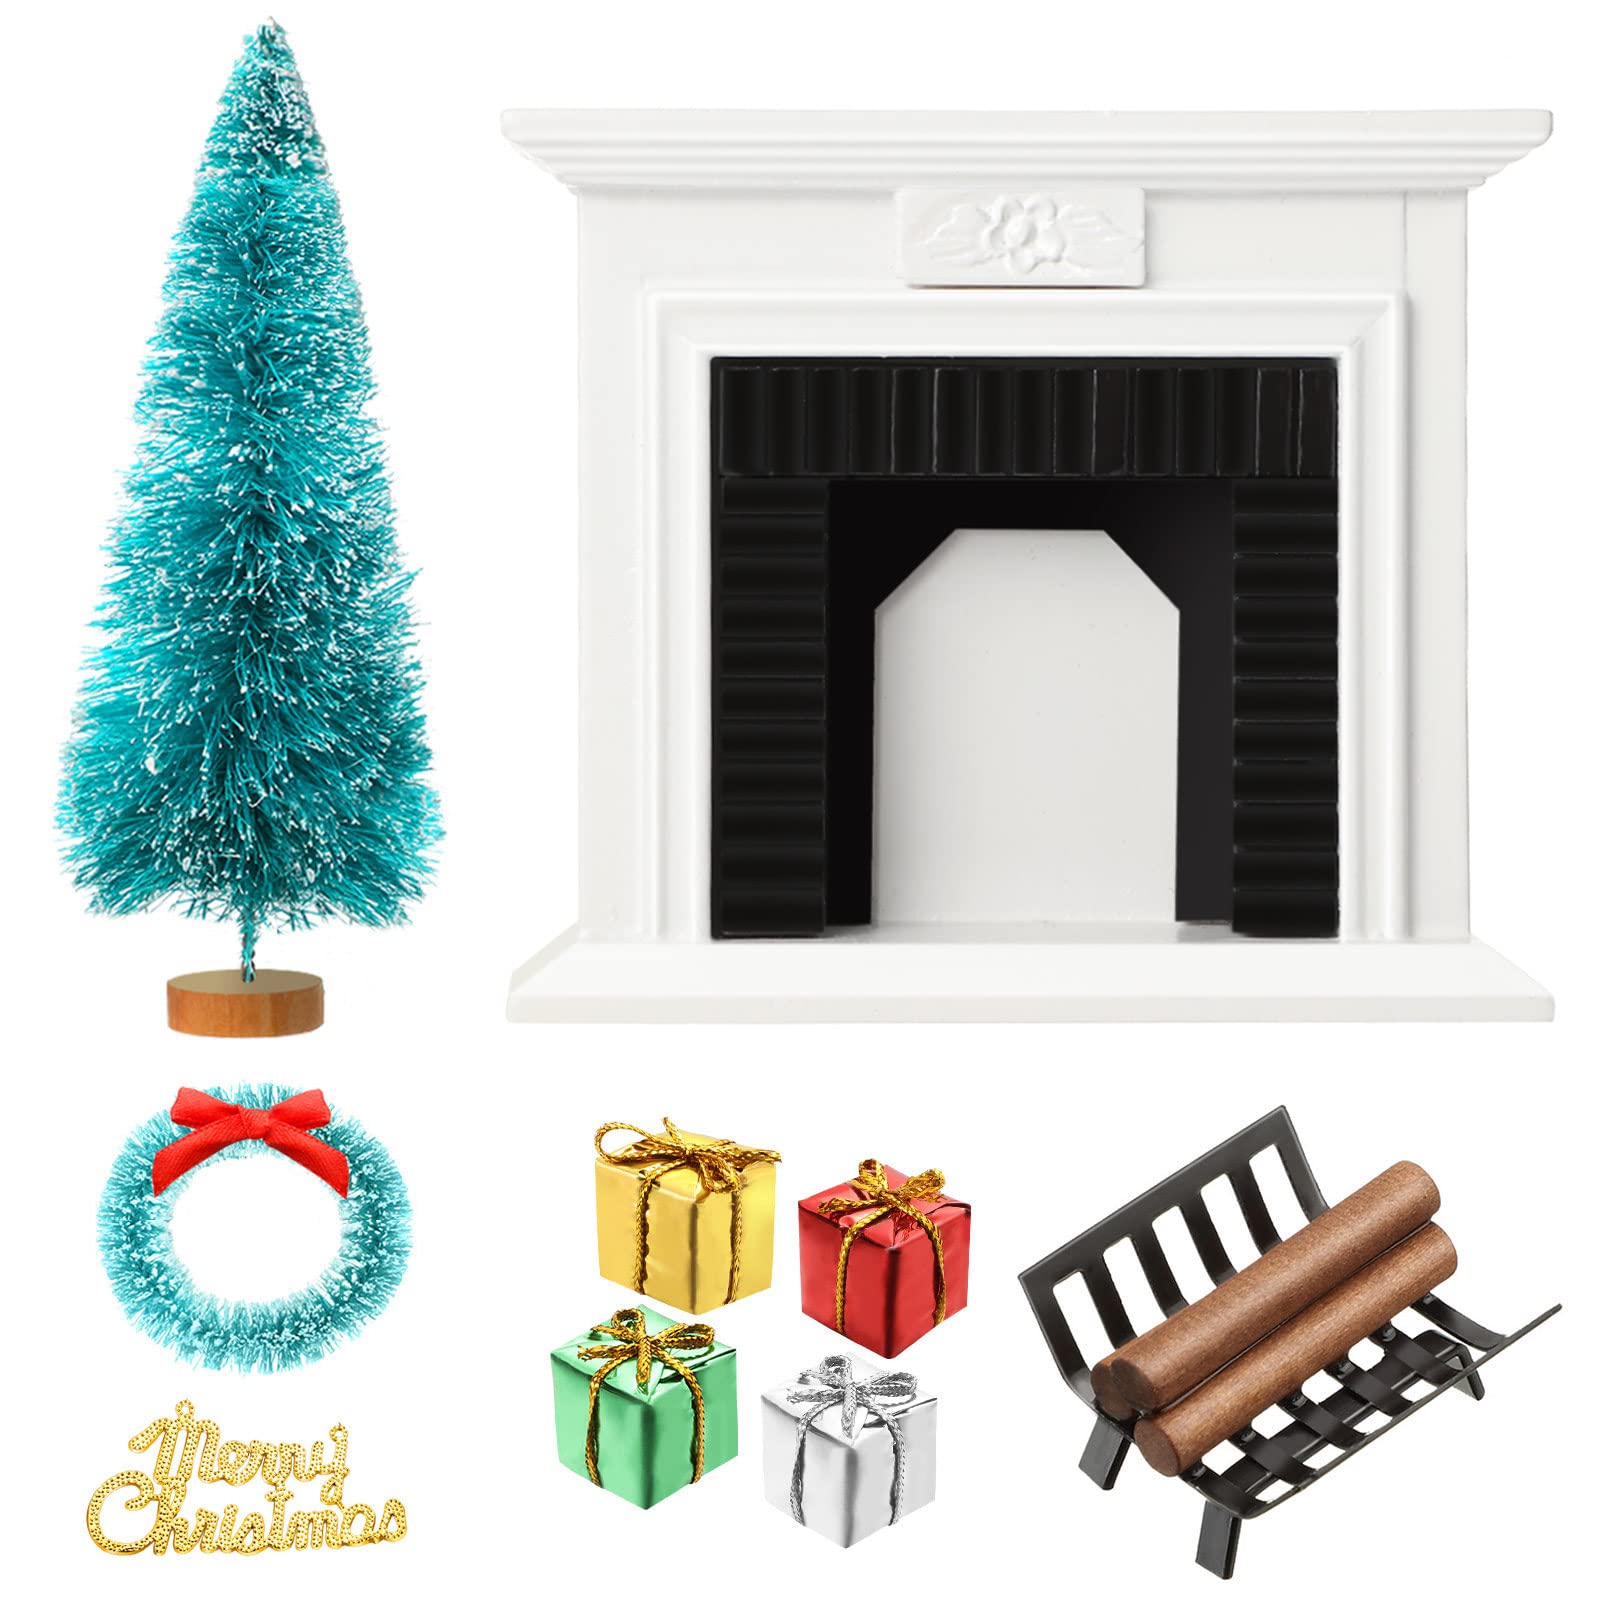 14 Pcs 1:12 Christmas Dollhouse Decoration Accessories with Wooden Vintage Fireplace, Christmas Stocking, Boxes Ornaments, Christmas Tree Wreath and Hanging Decoration Firewood Rack Firewood Holder